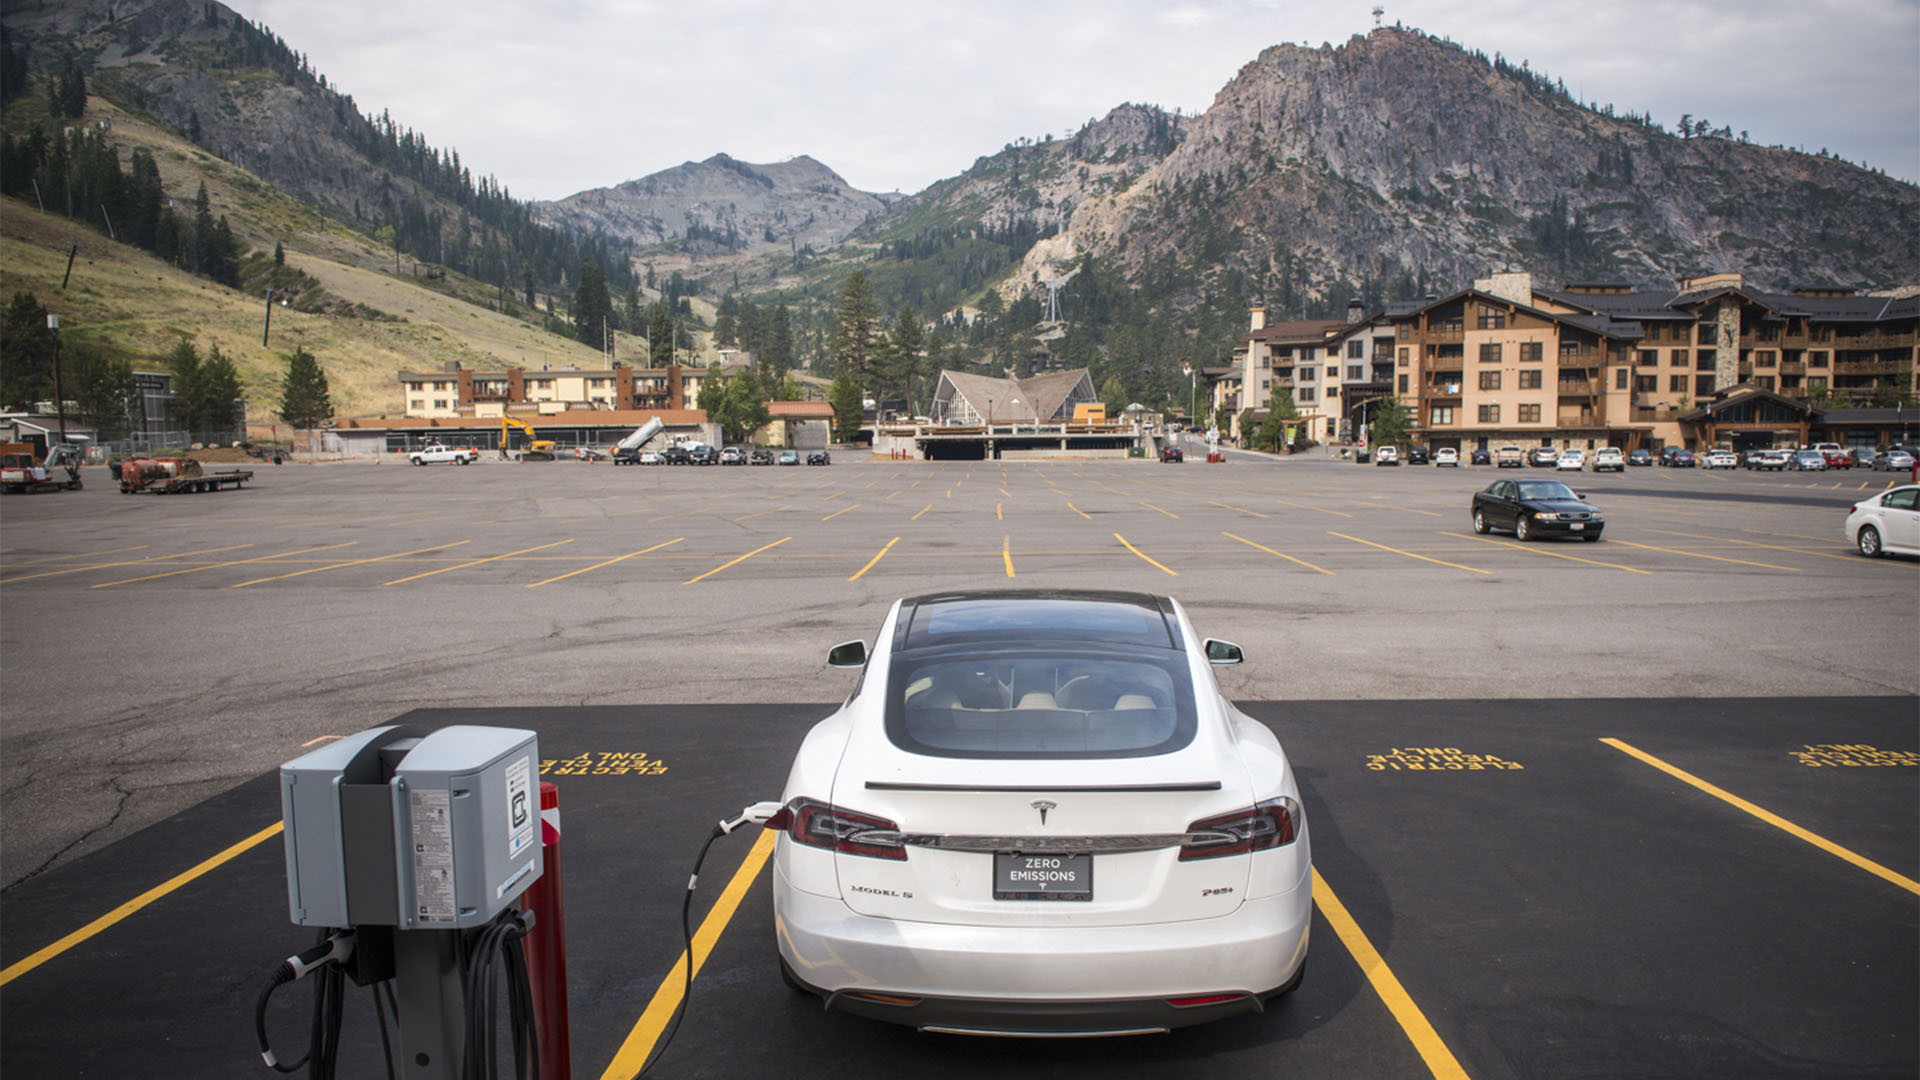 Olympic Valley has several electric car charging stations in the Far East lot, shown here. 